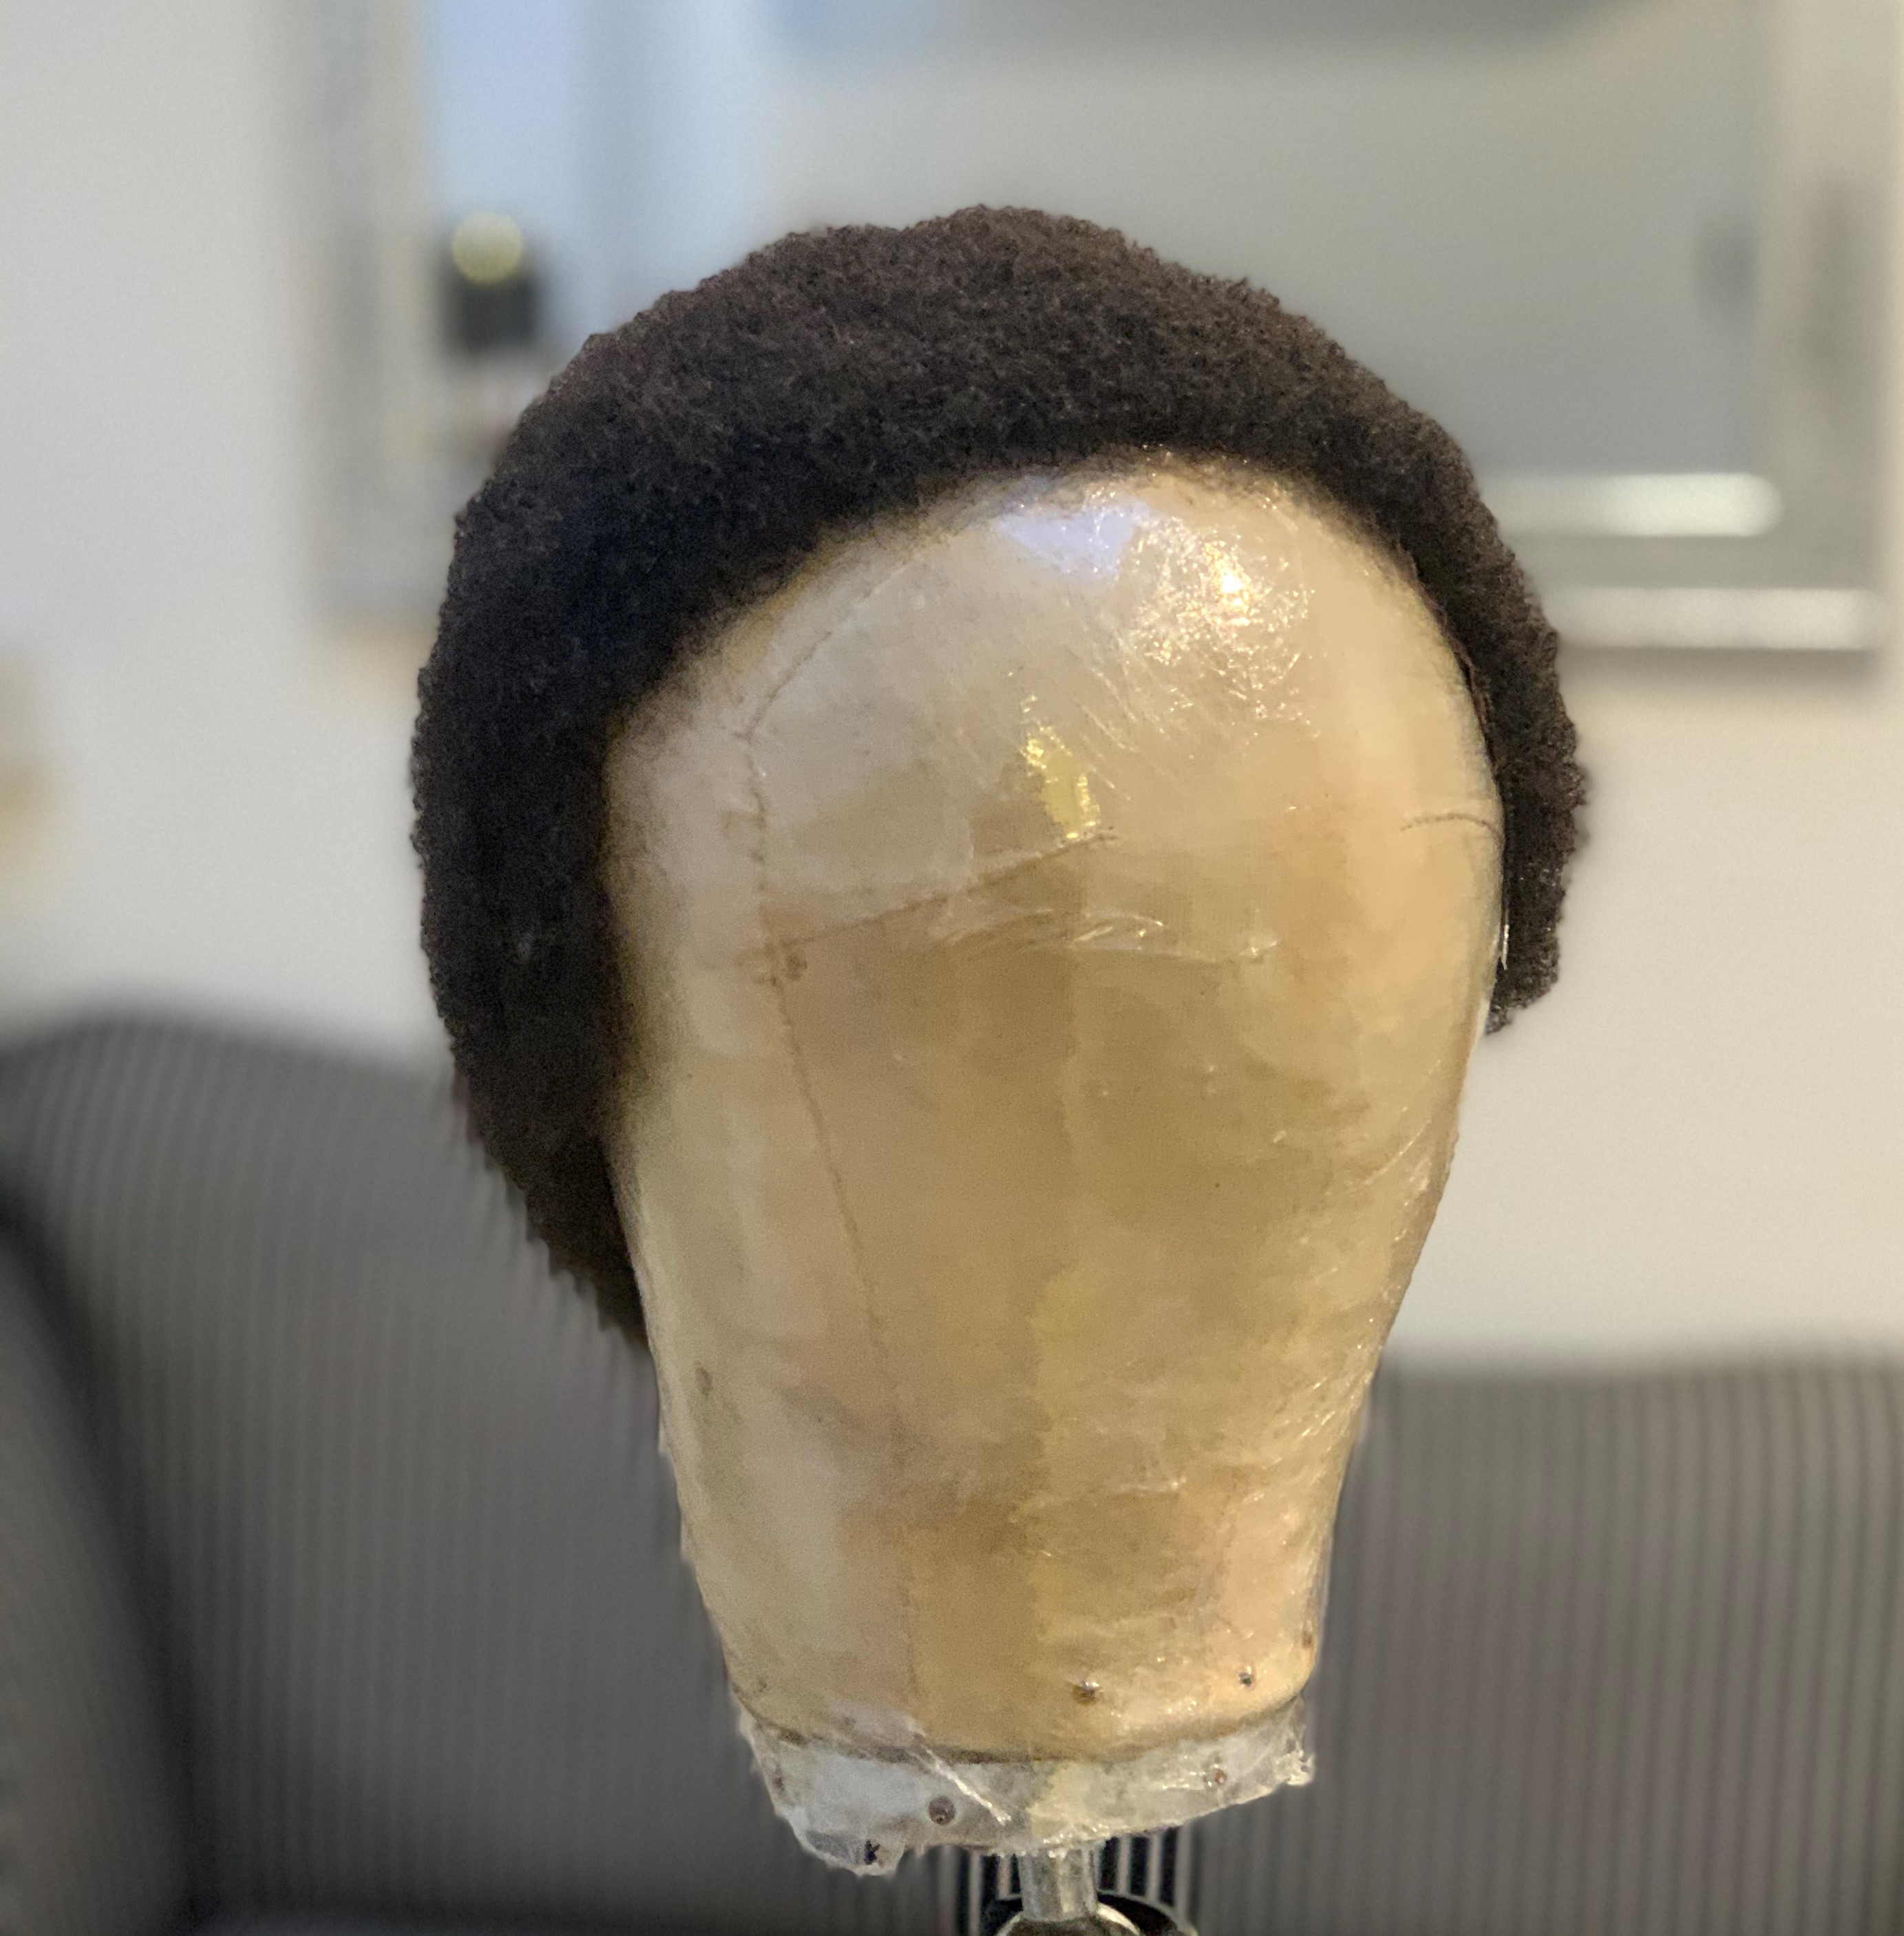 The second wig made for The Little Princess Trust which was made from Afro hair donations.